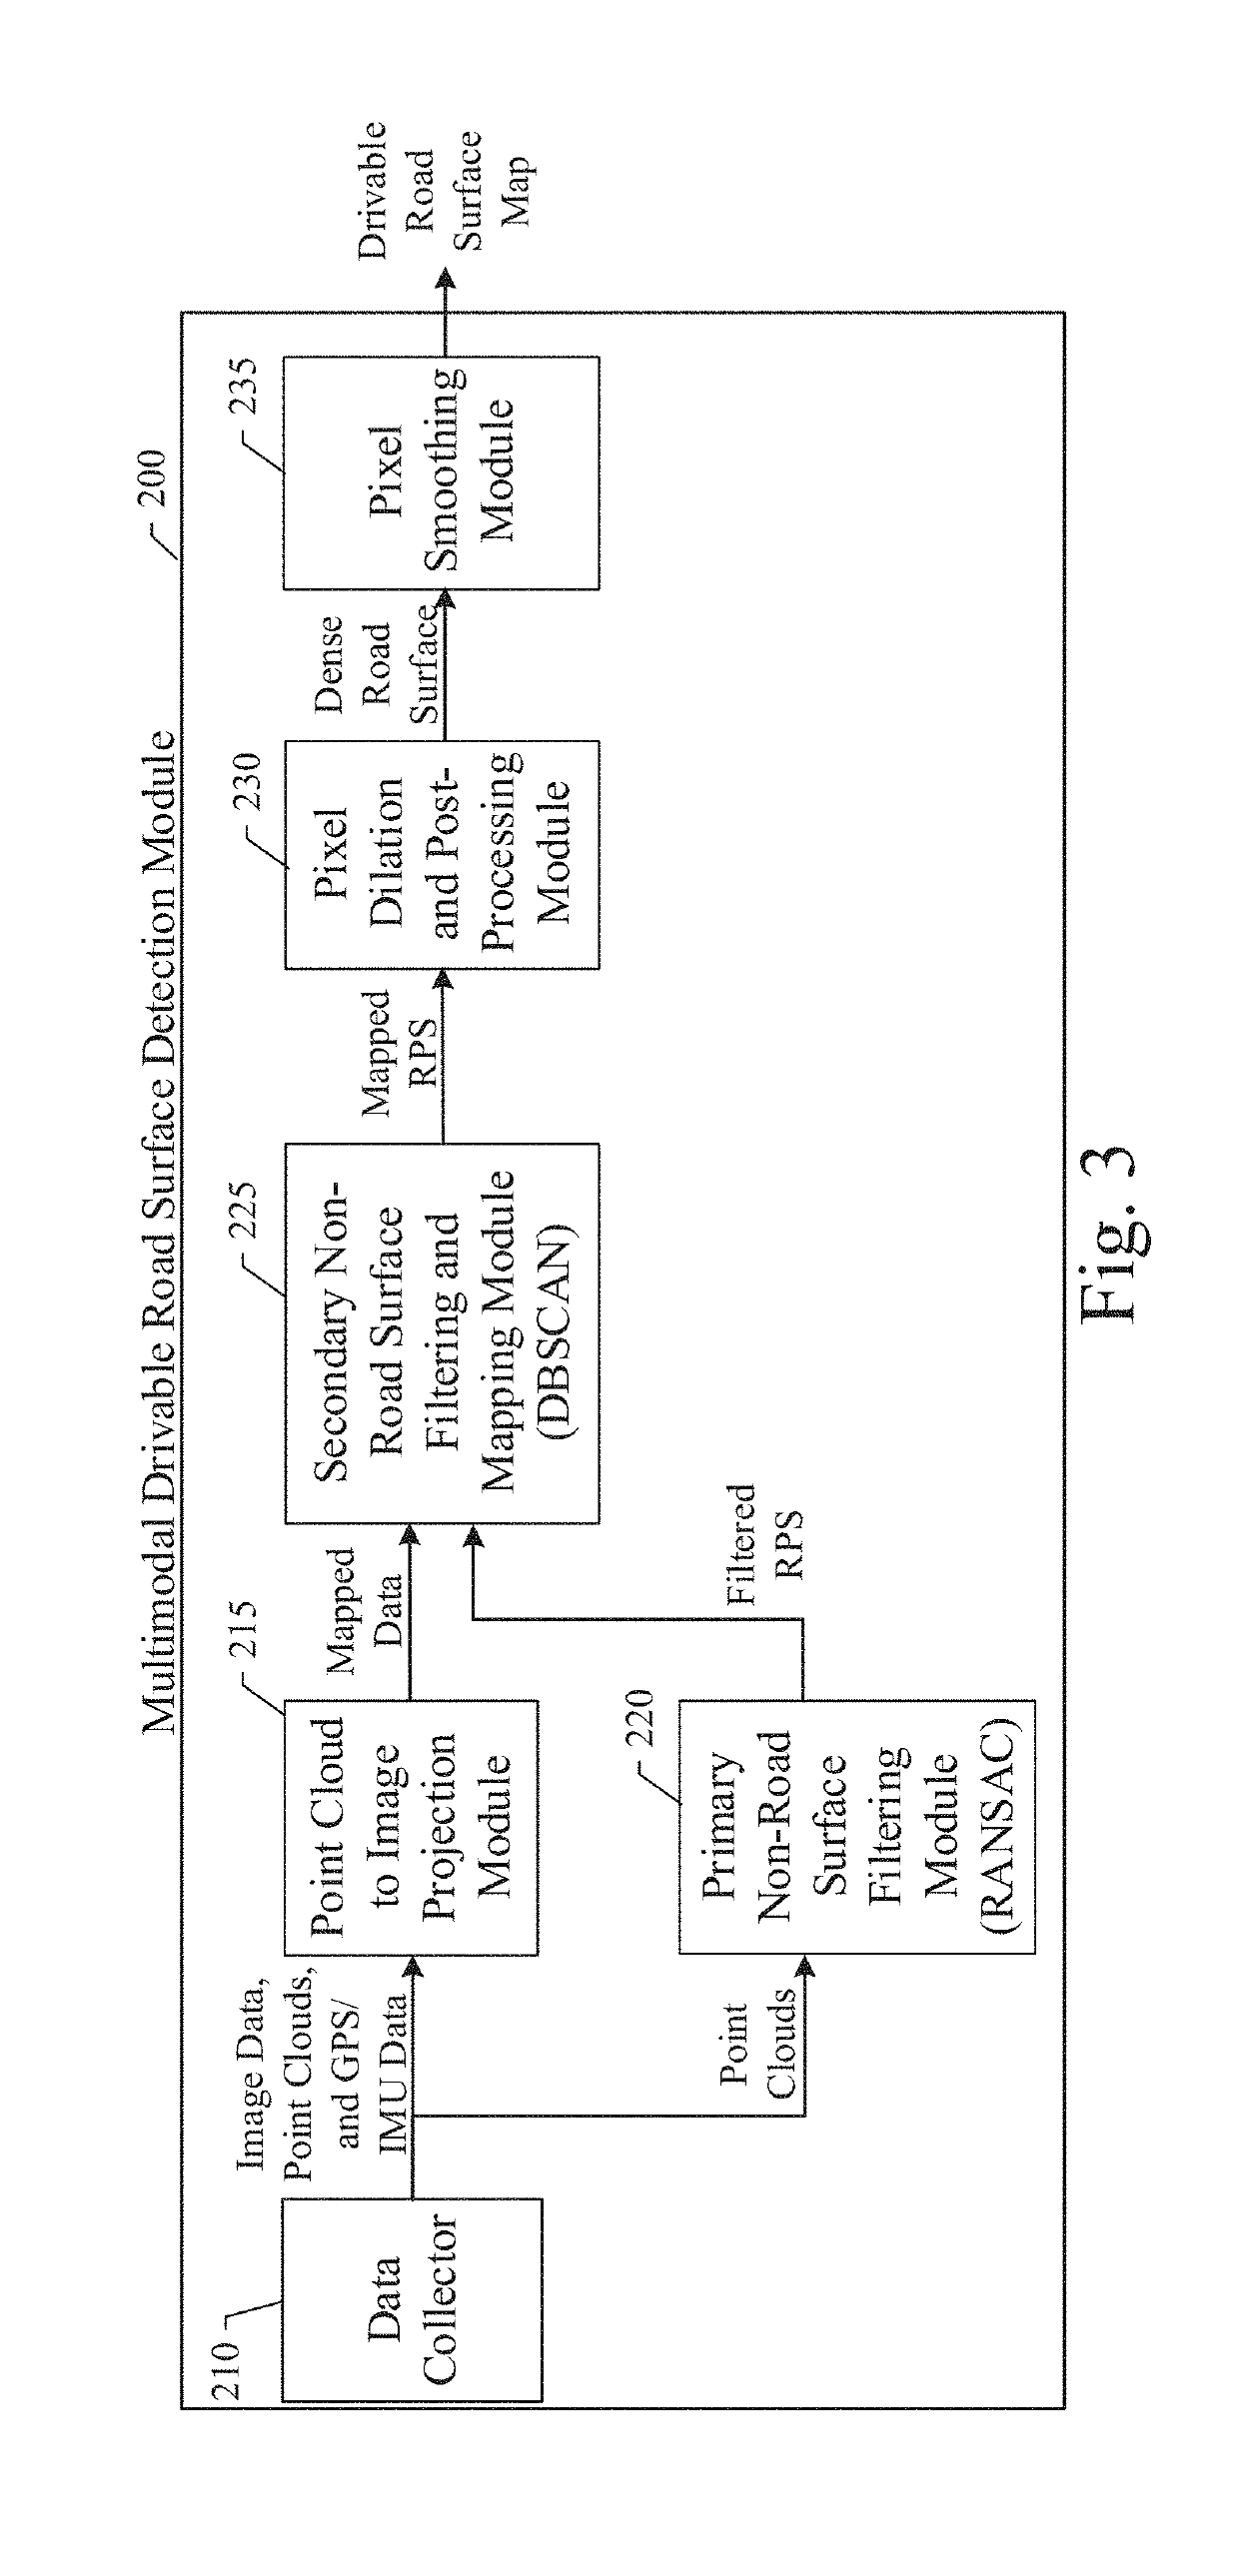 System and method for drivable road surface representation generation using multimodal sensor data